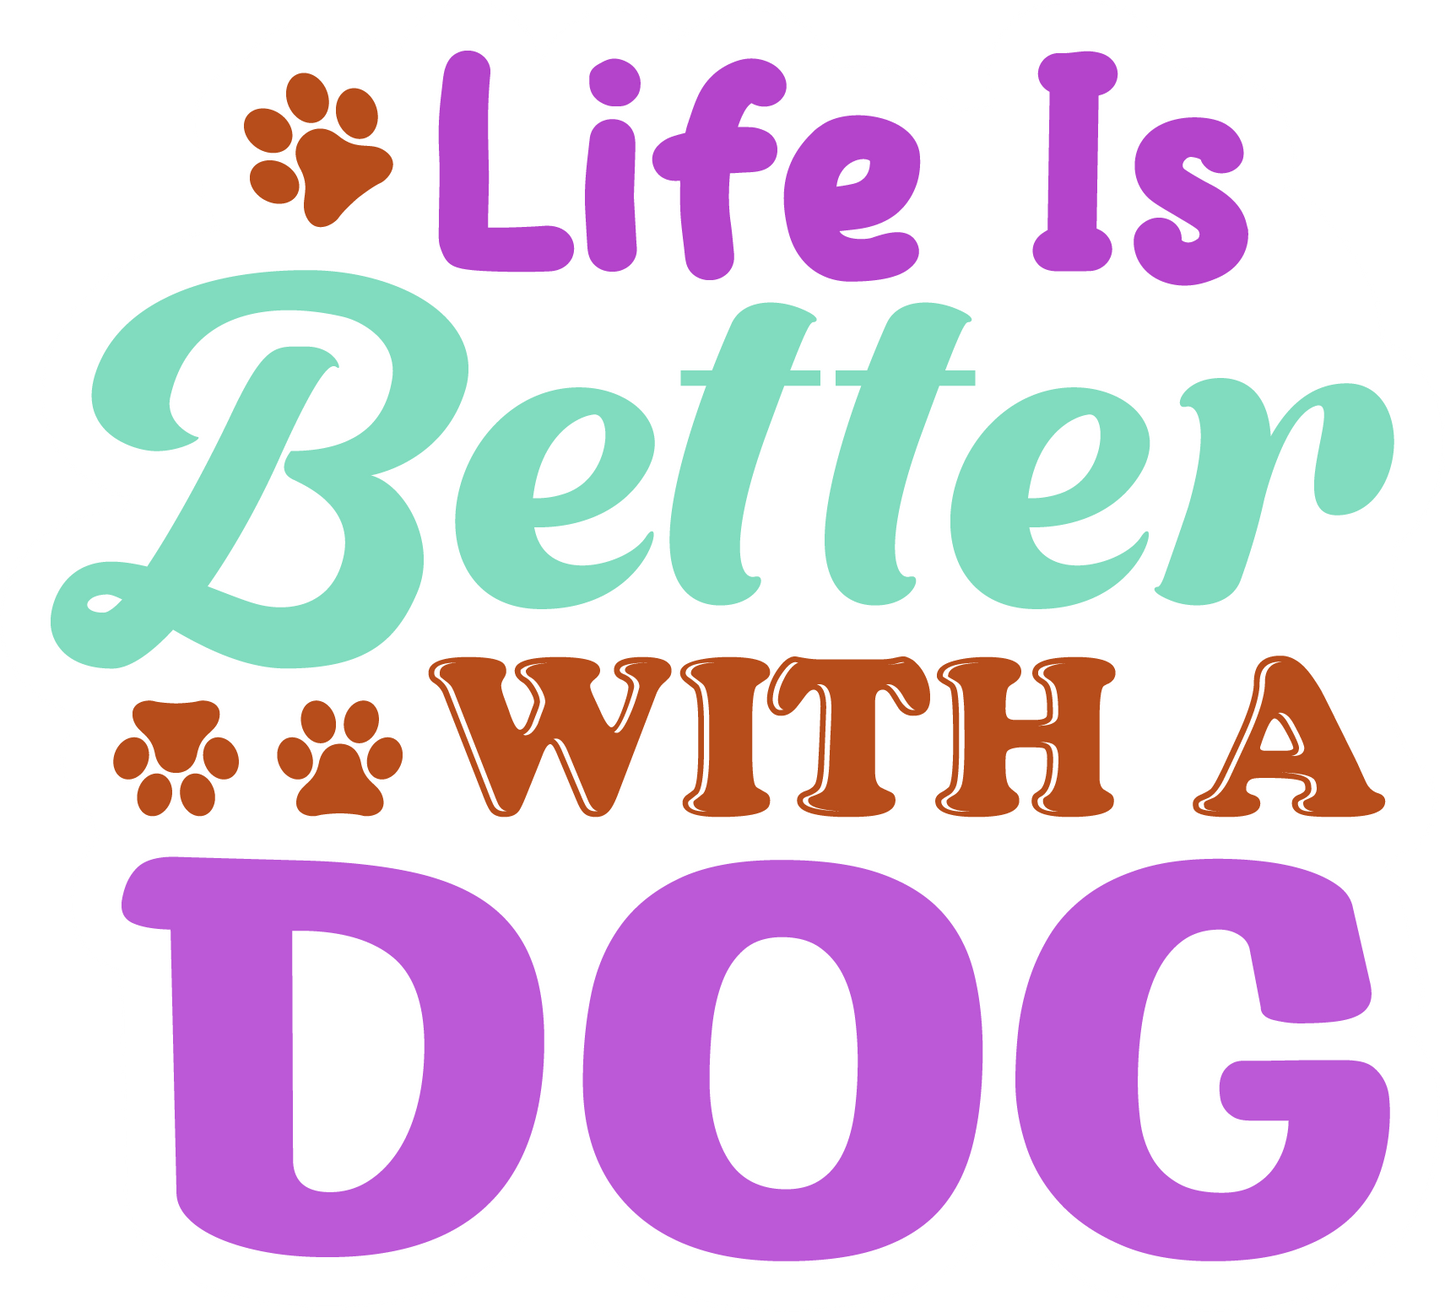 Stickers - Life is Better With a Dog - Dog Lovers Stickers